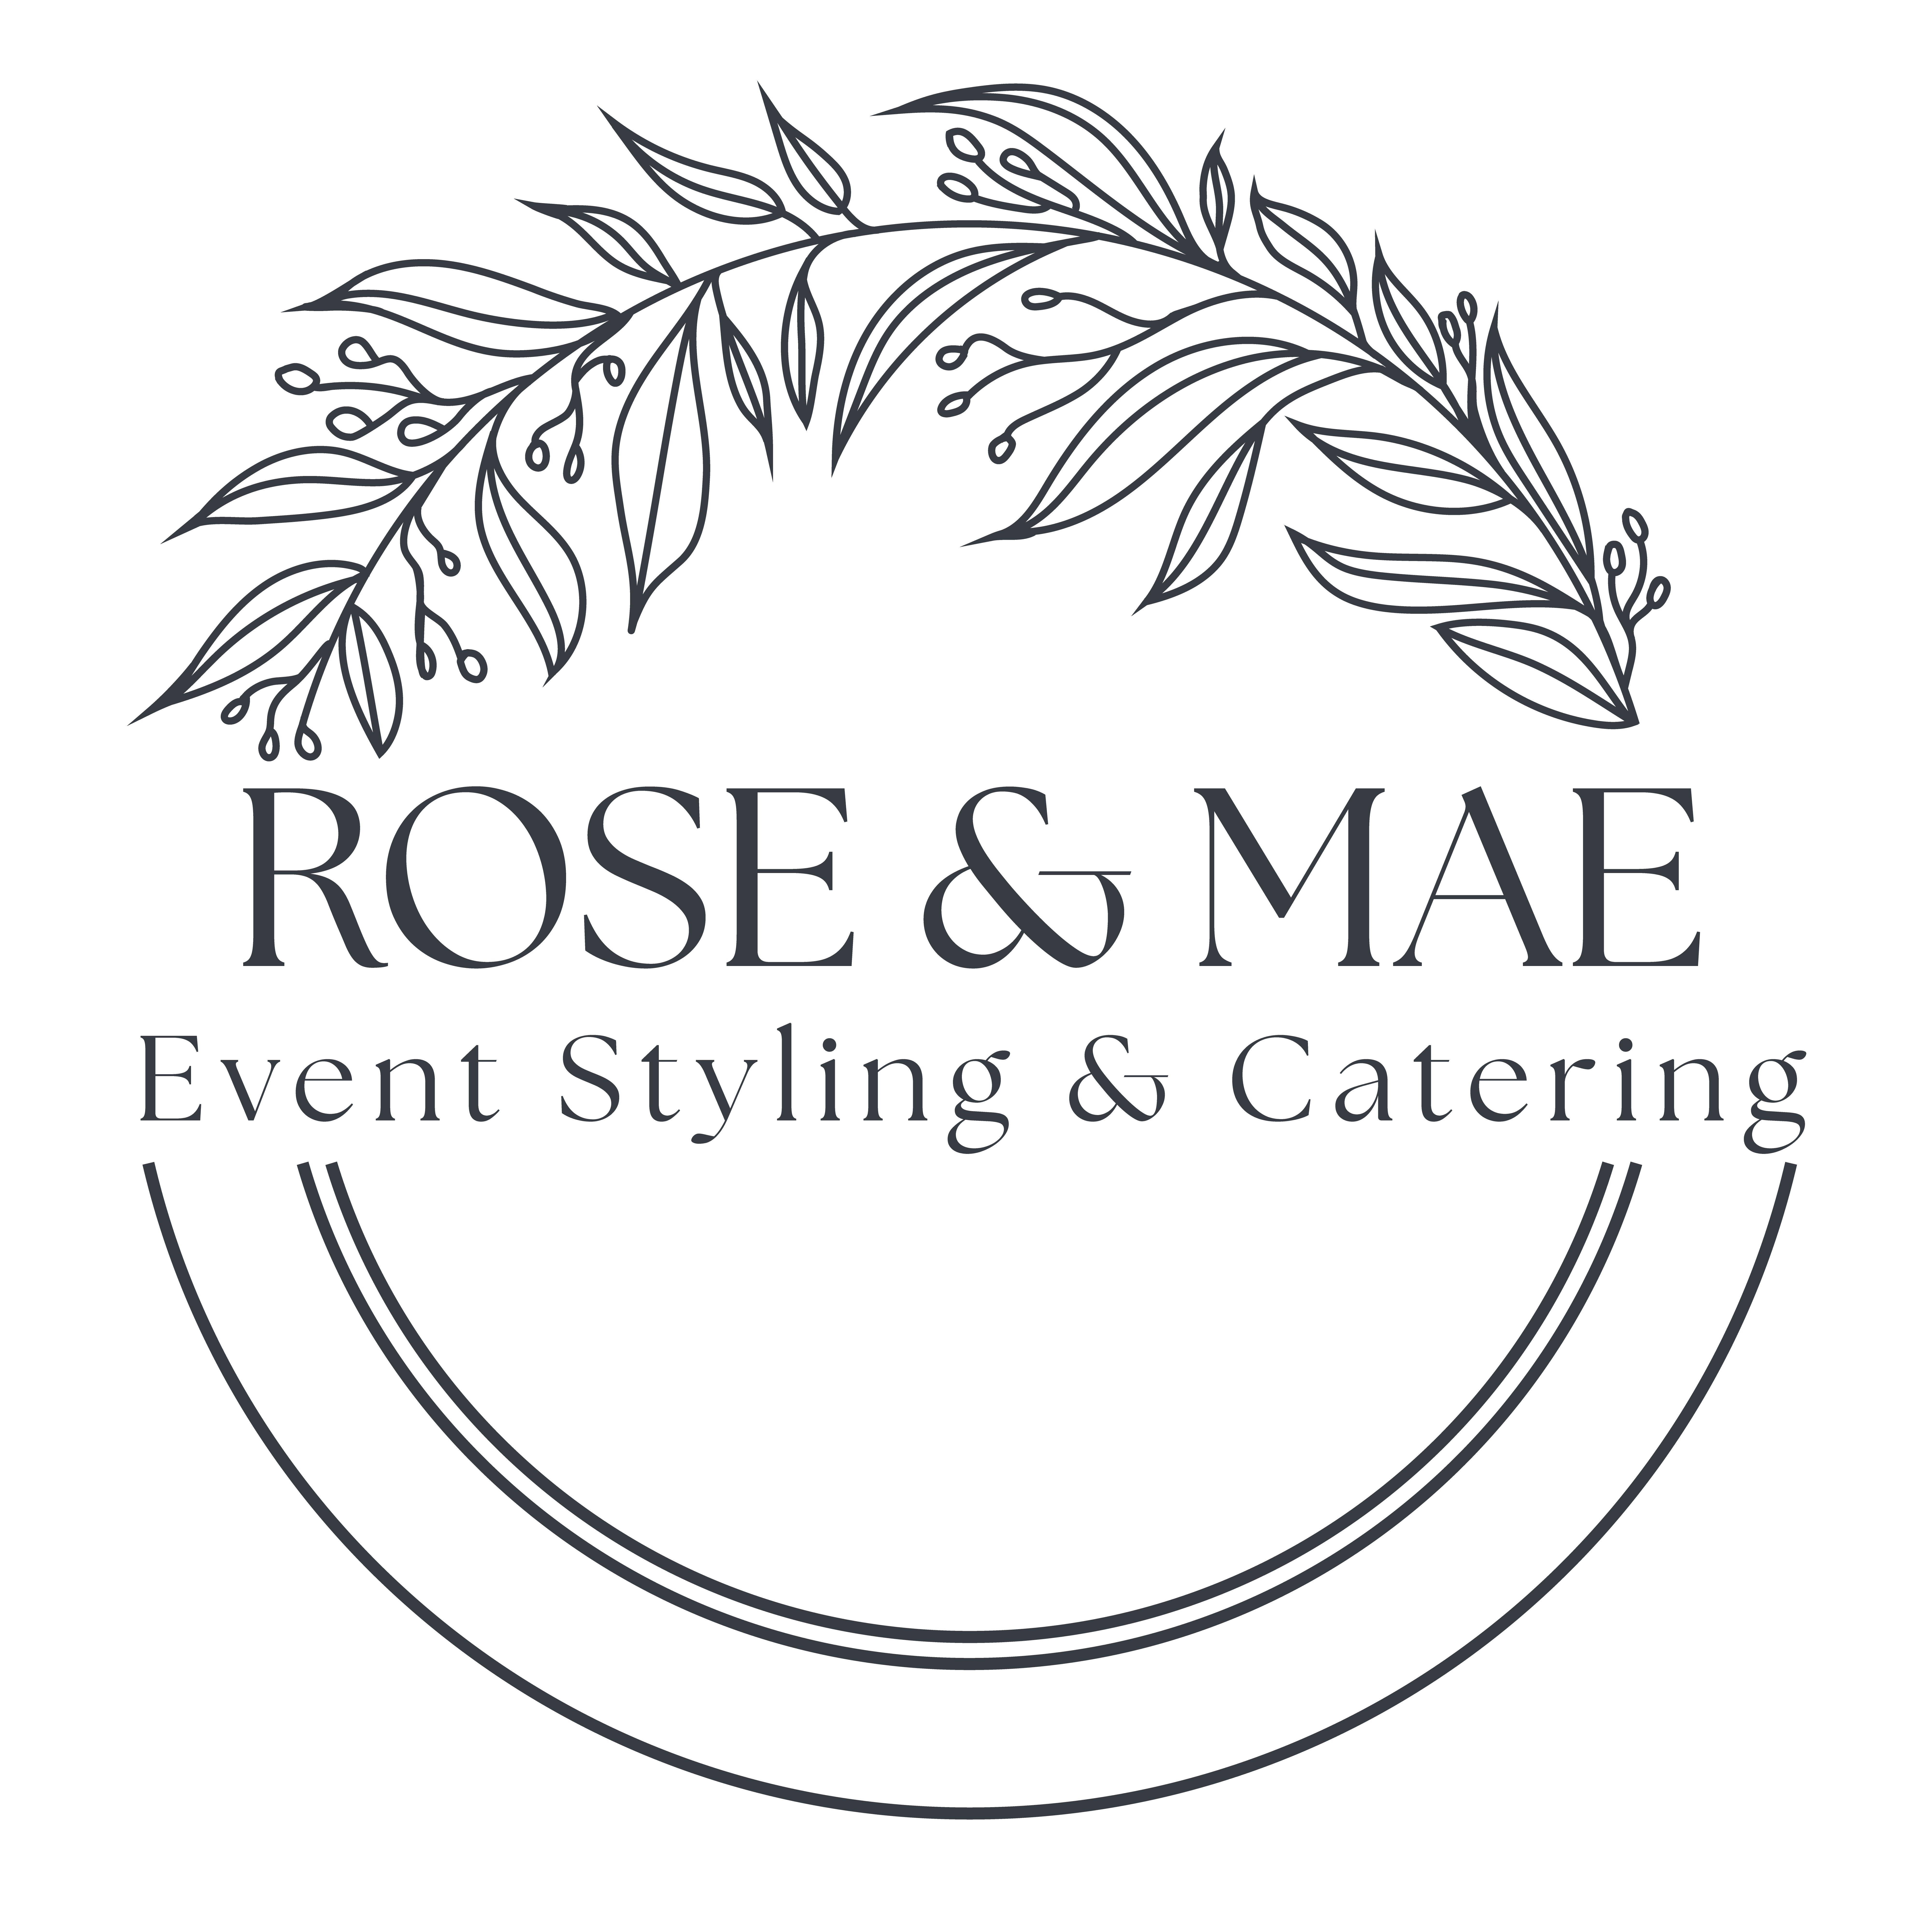 Rose & Mae Events